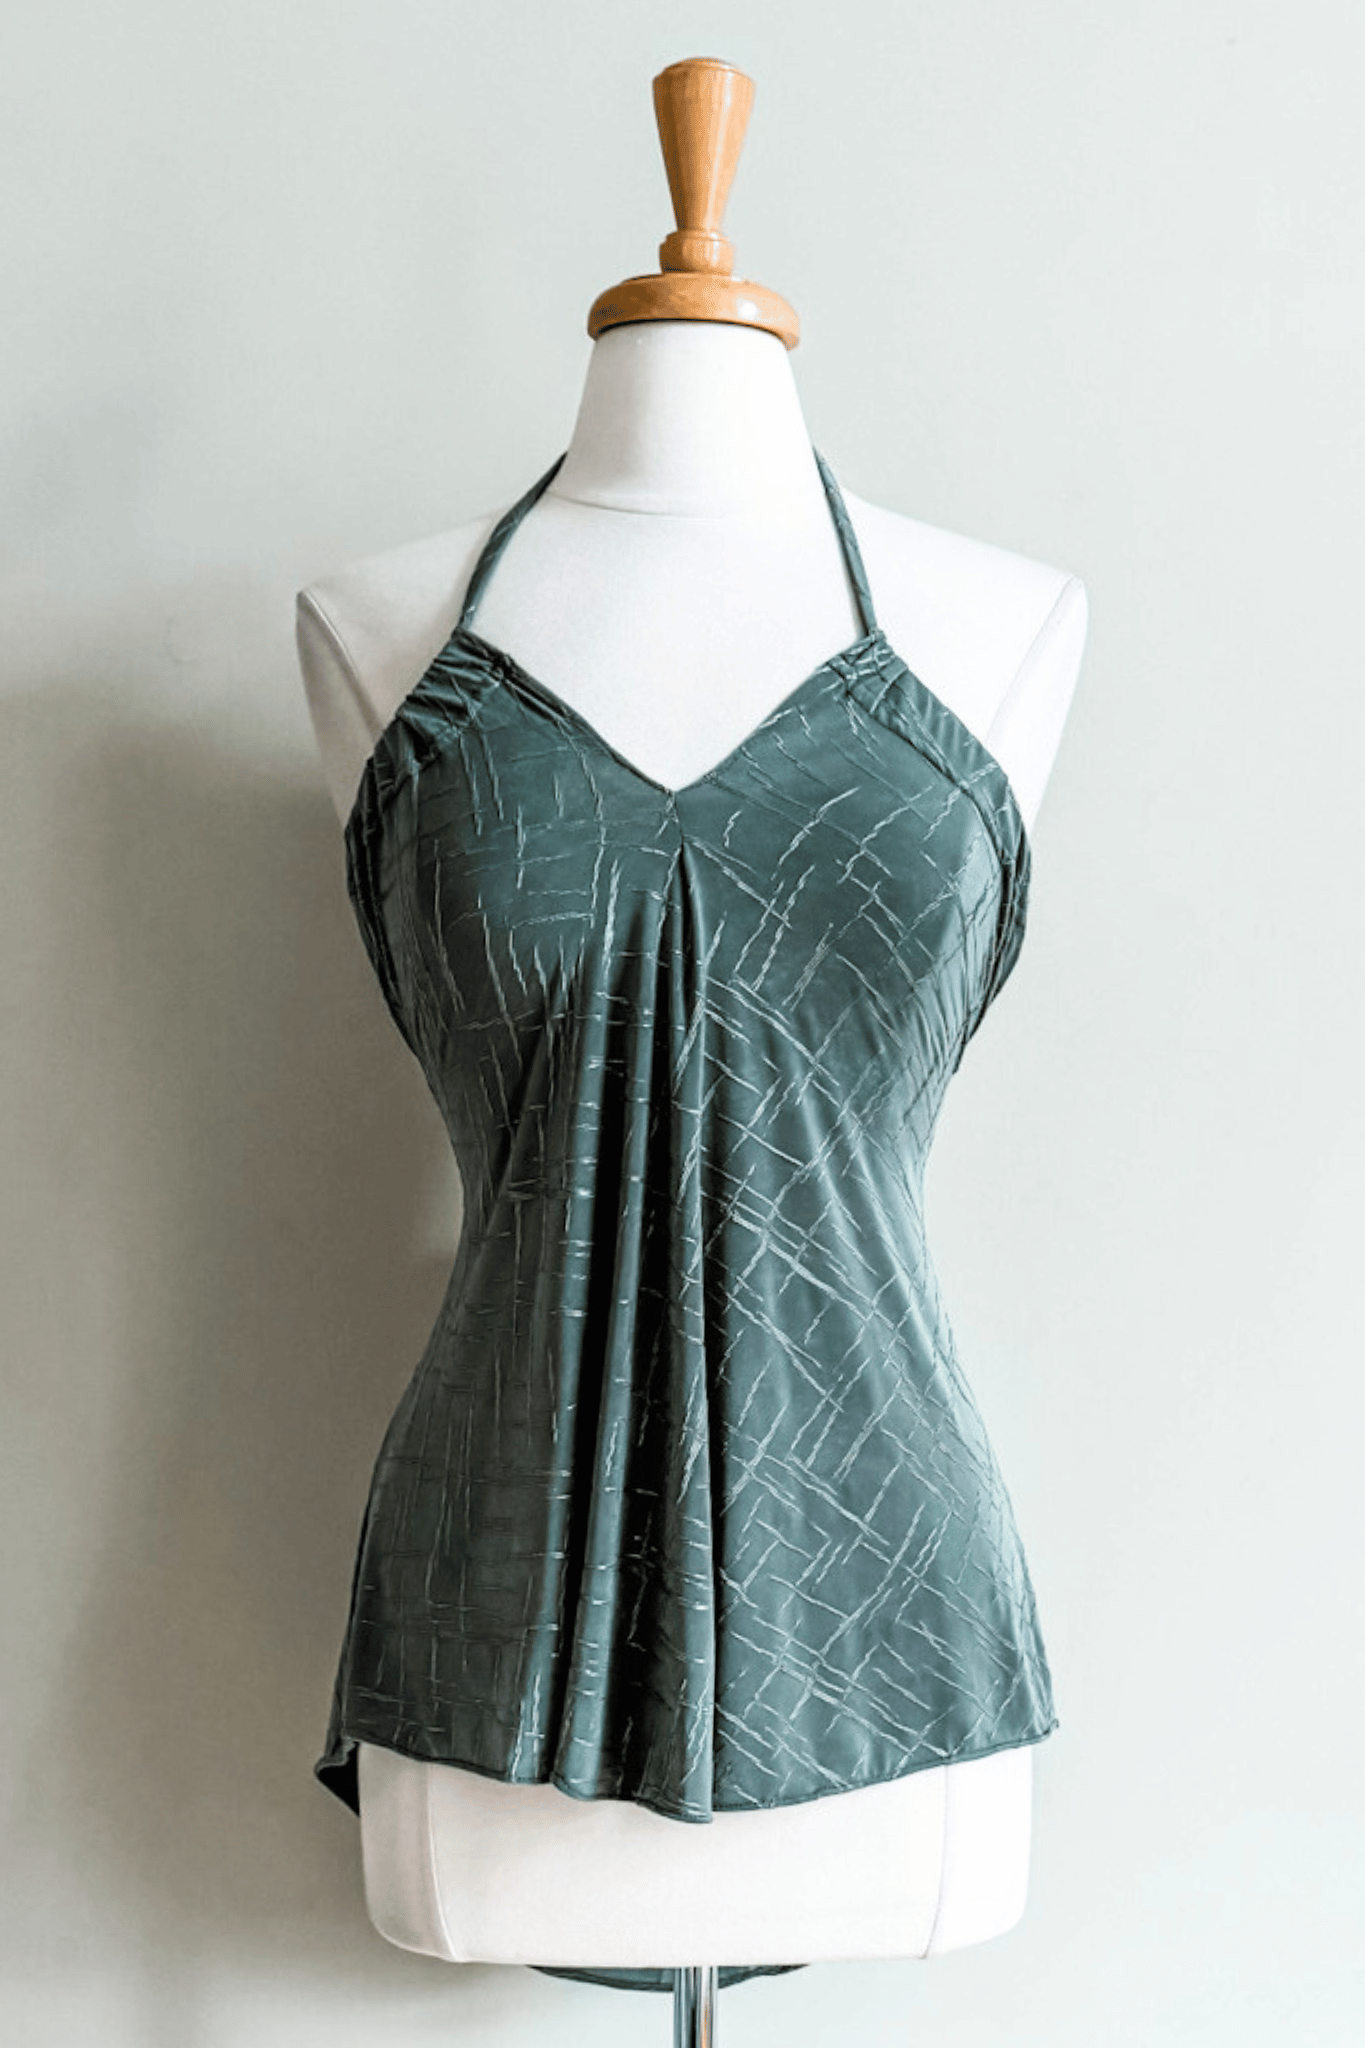 Evermore Top in Sage Jacquard